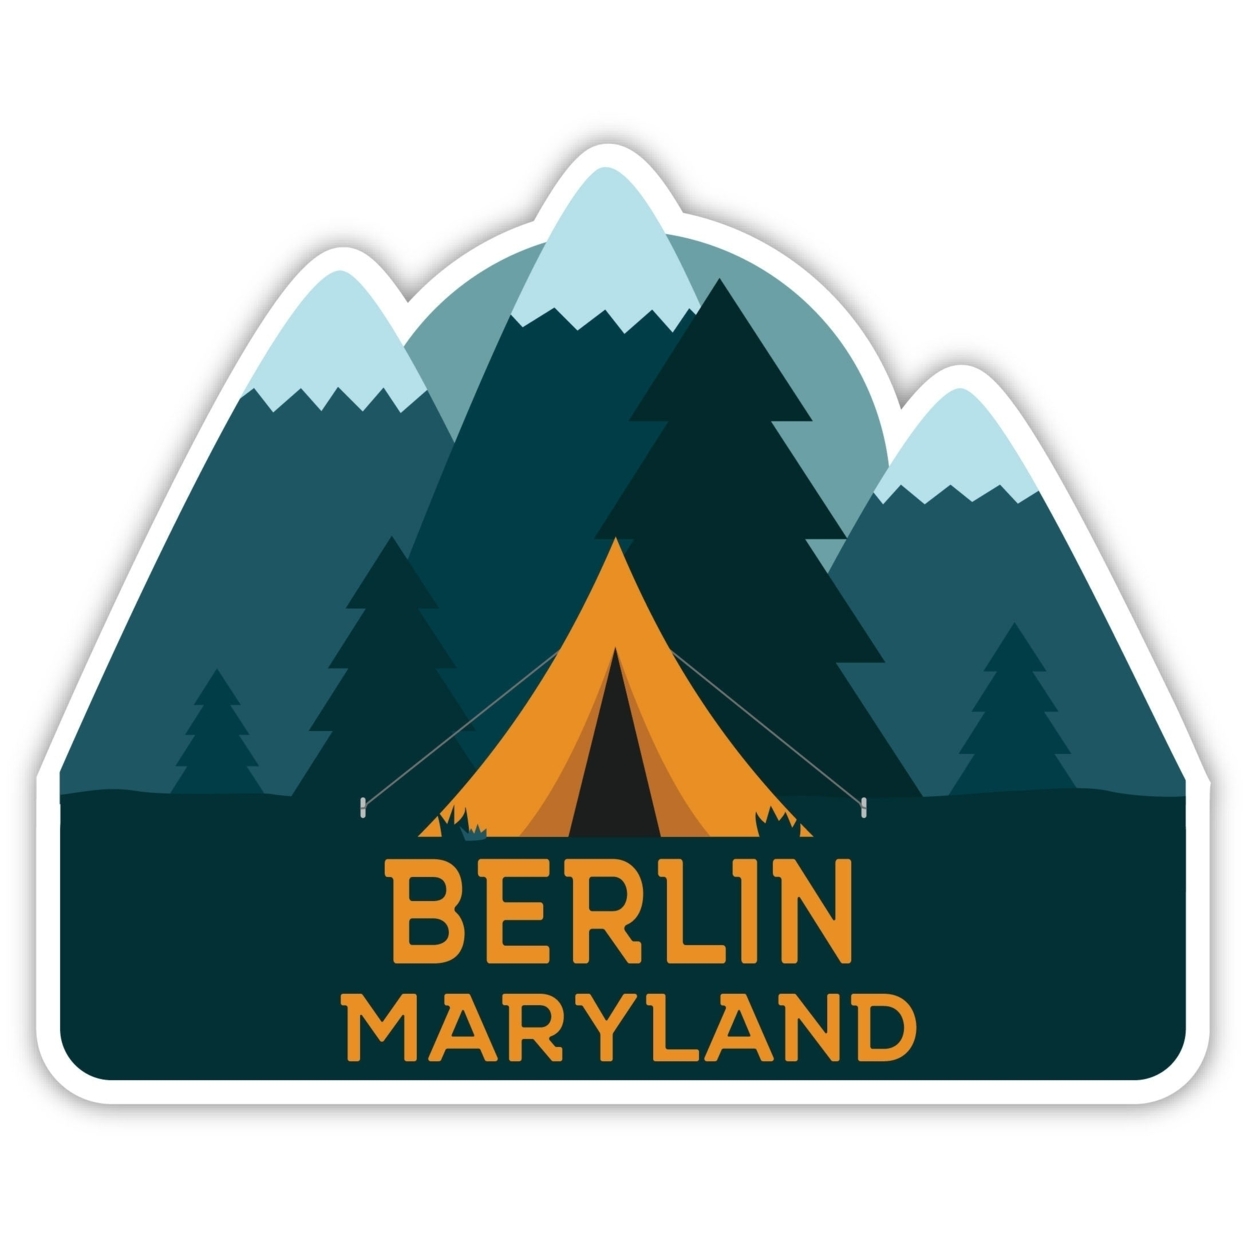 Berlin Maryland Souvenir Decorative Stickers (Choose Theme And Size) - 4-Pack, 10-Inch, Tent